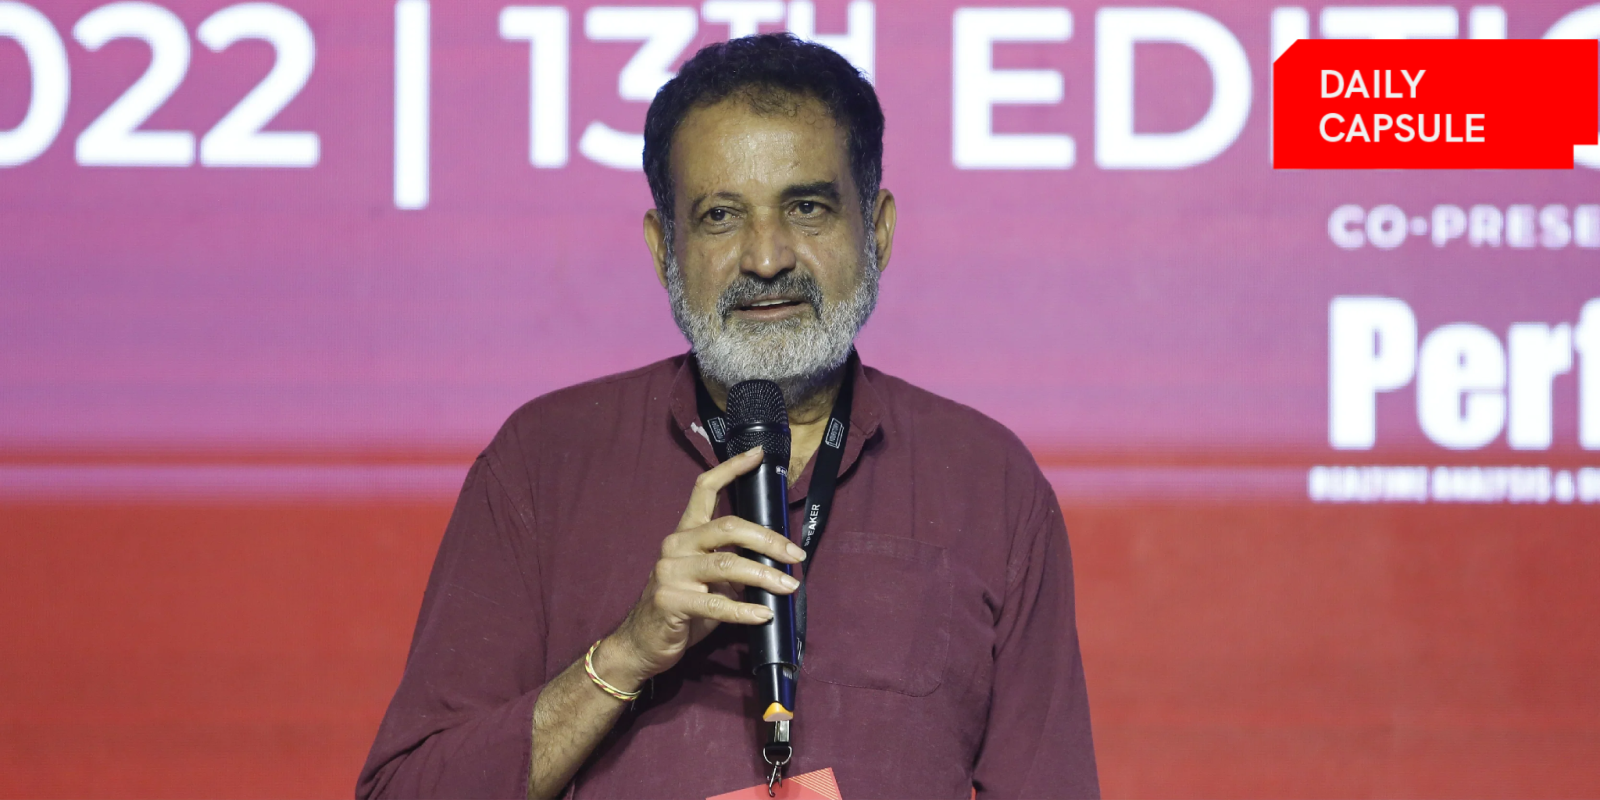 India’s startup story to rebound: Mohandas Pai; Batting for girls in tech